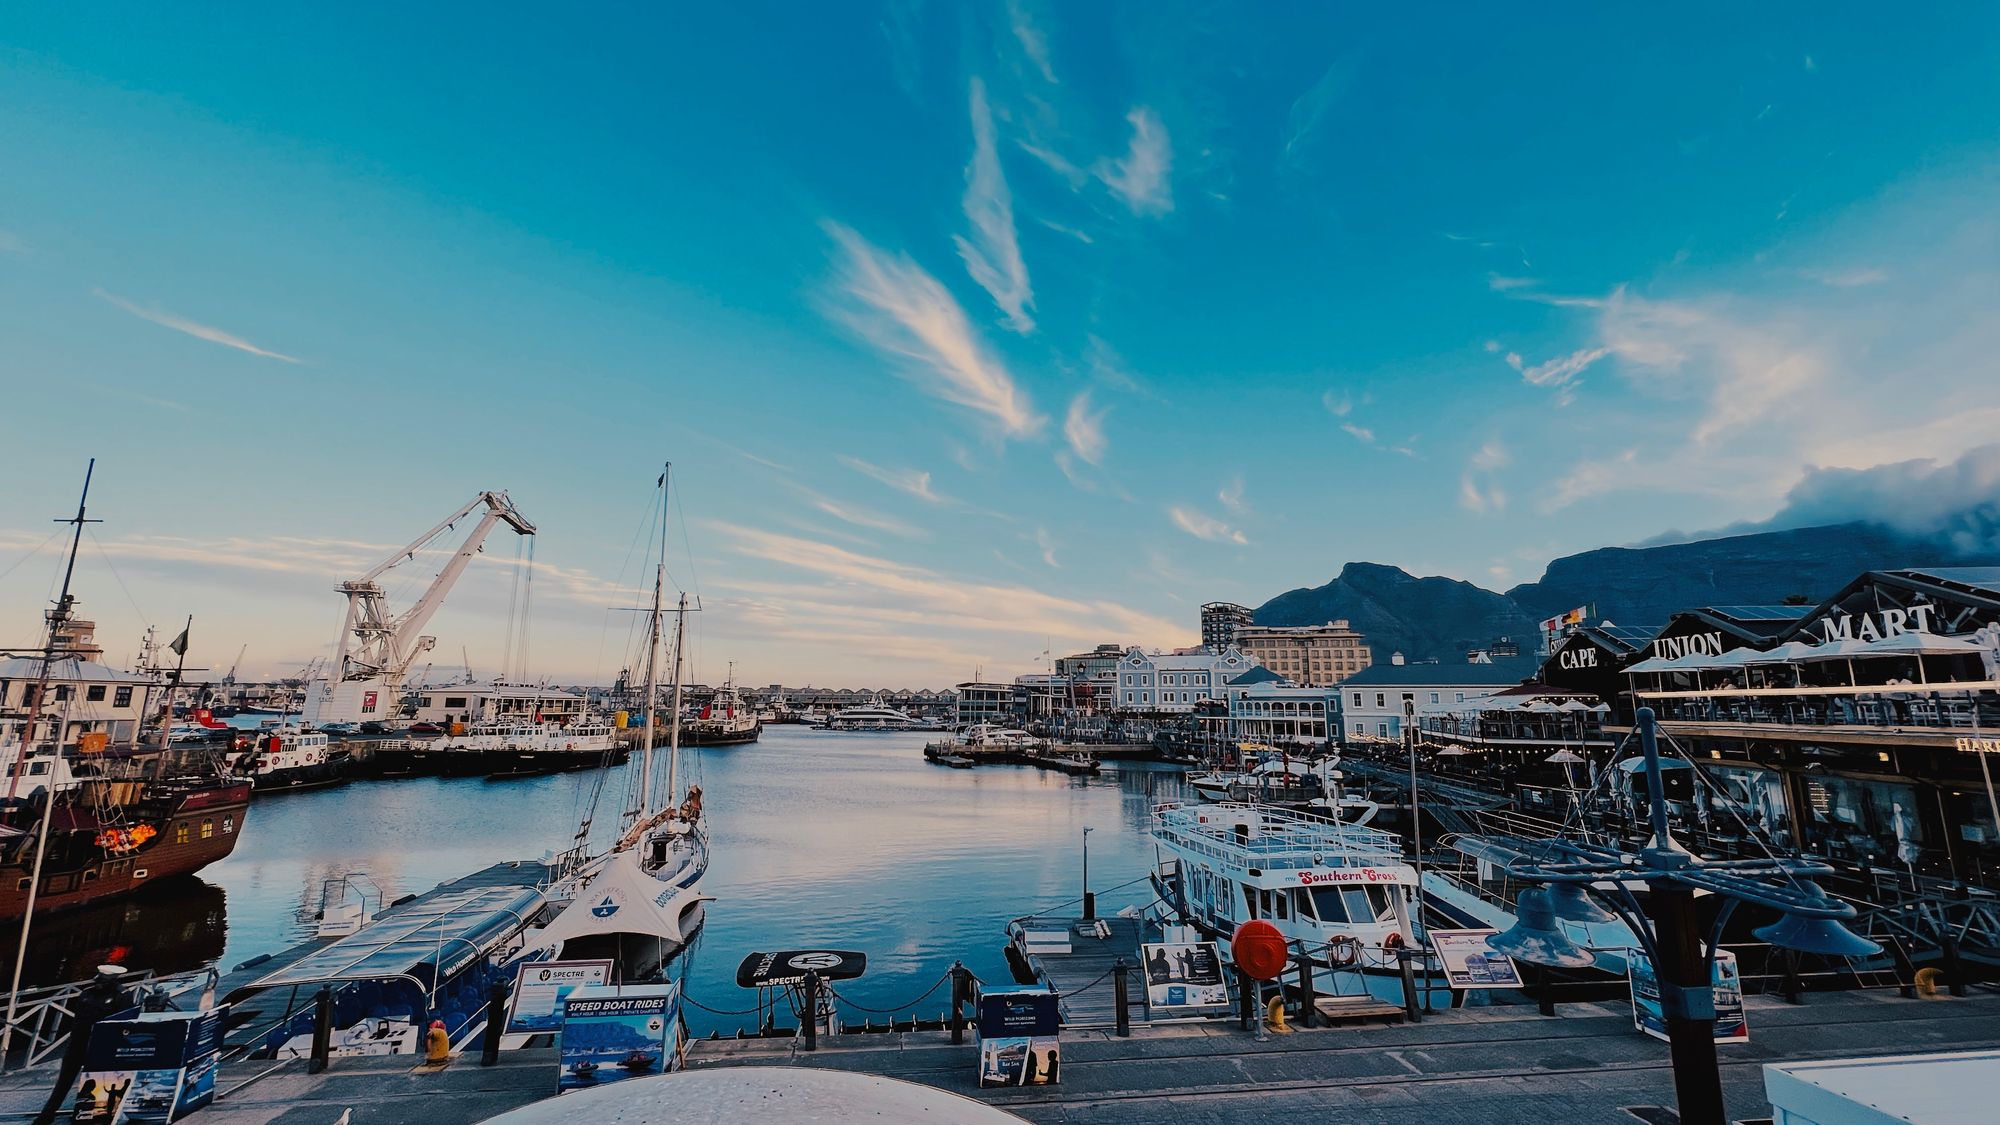 View of the V&A Waterfront in Cape Town